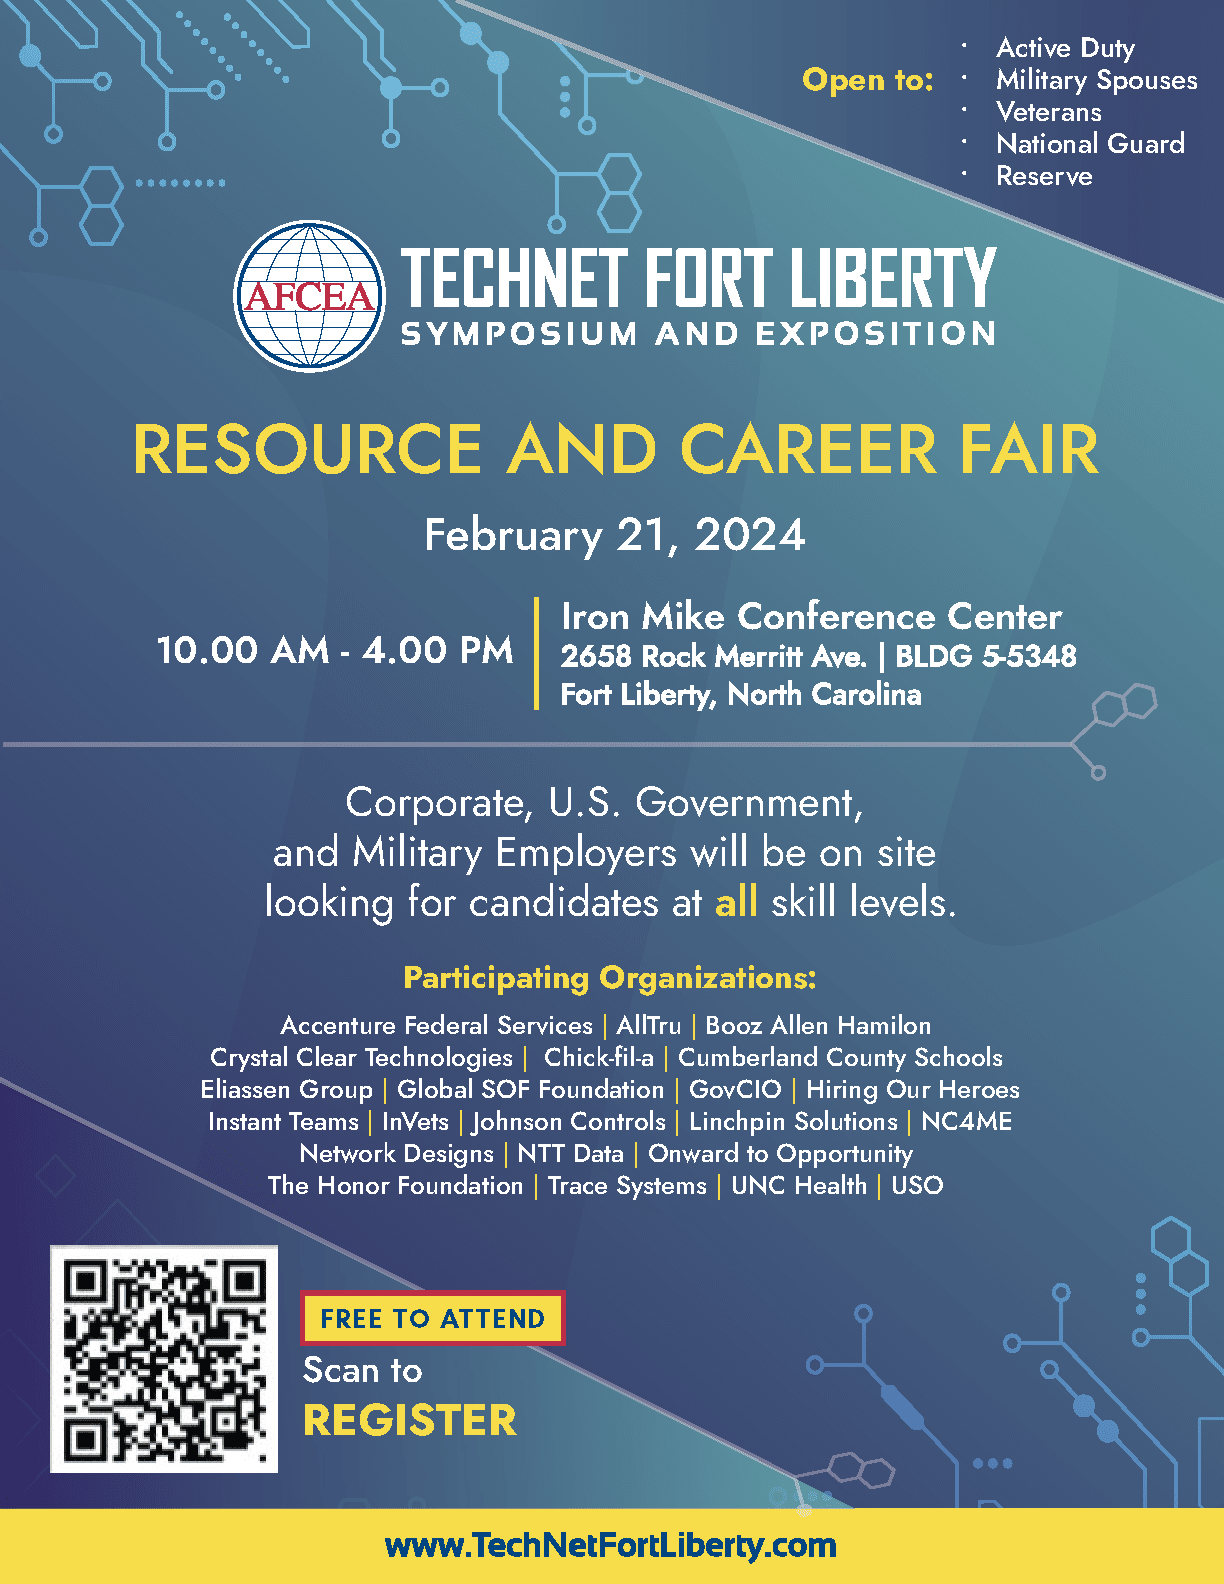 Resource & Career Fair Flyer featuring Industry organizaitons